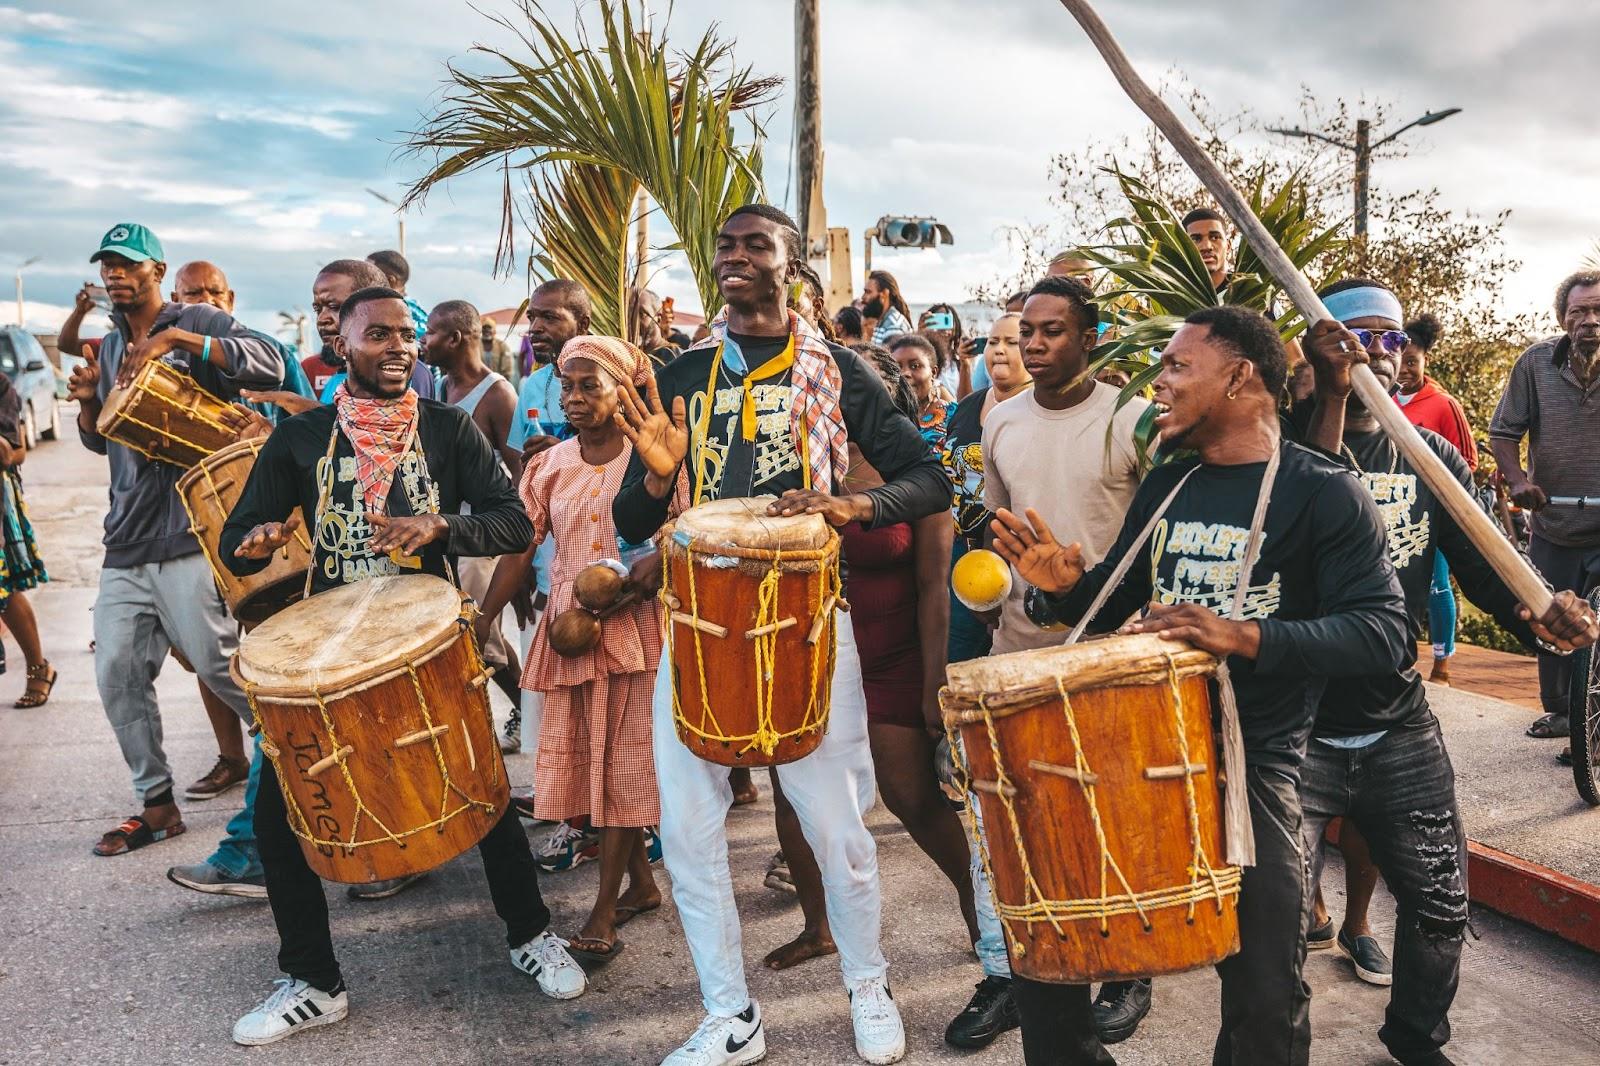 nnual Garifuna Settlement Day celebration and Yurumein re-enactment of the ancestral Garinagu’s journey to Belize with drums and flags